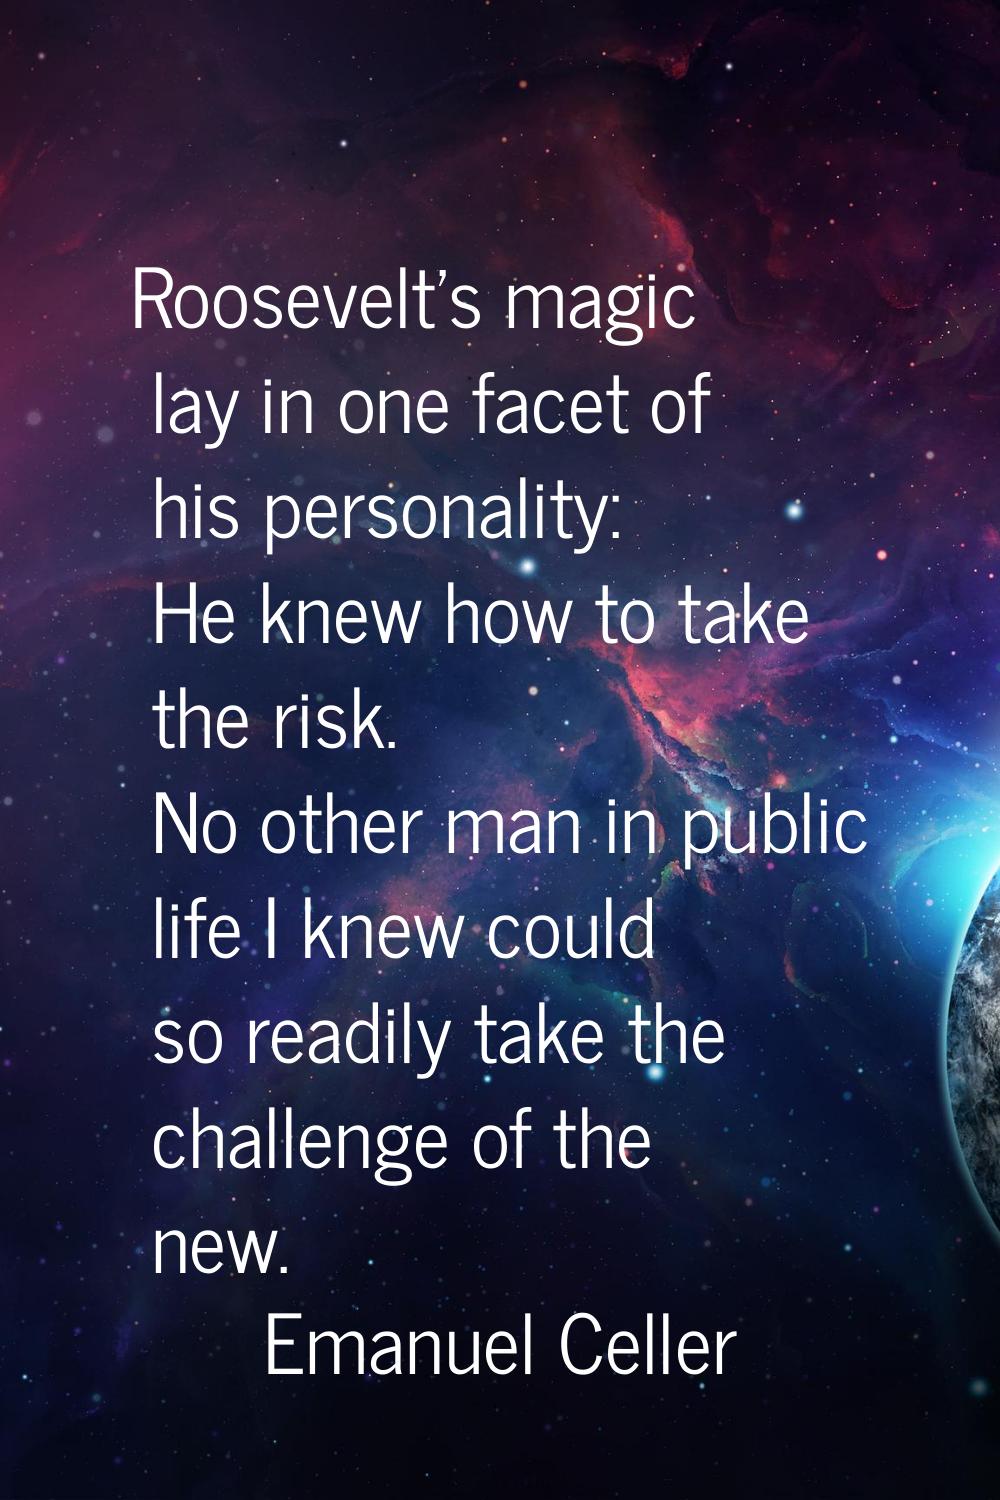 Roosevelt's magic lay in one facet of his personality: He knew how to take the risk. No other man i